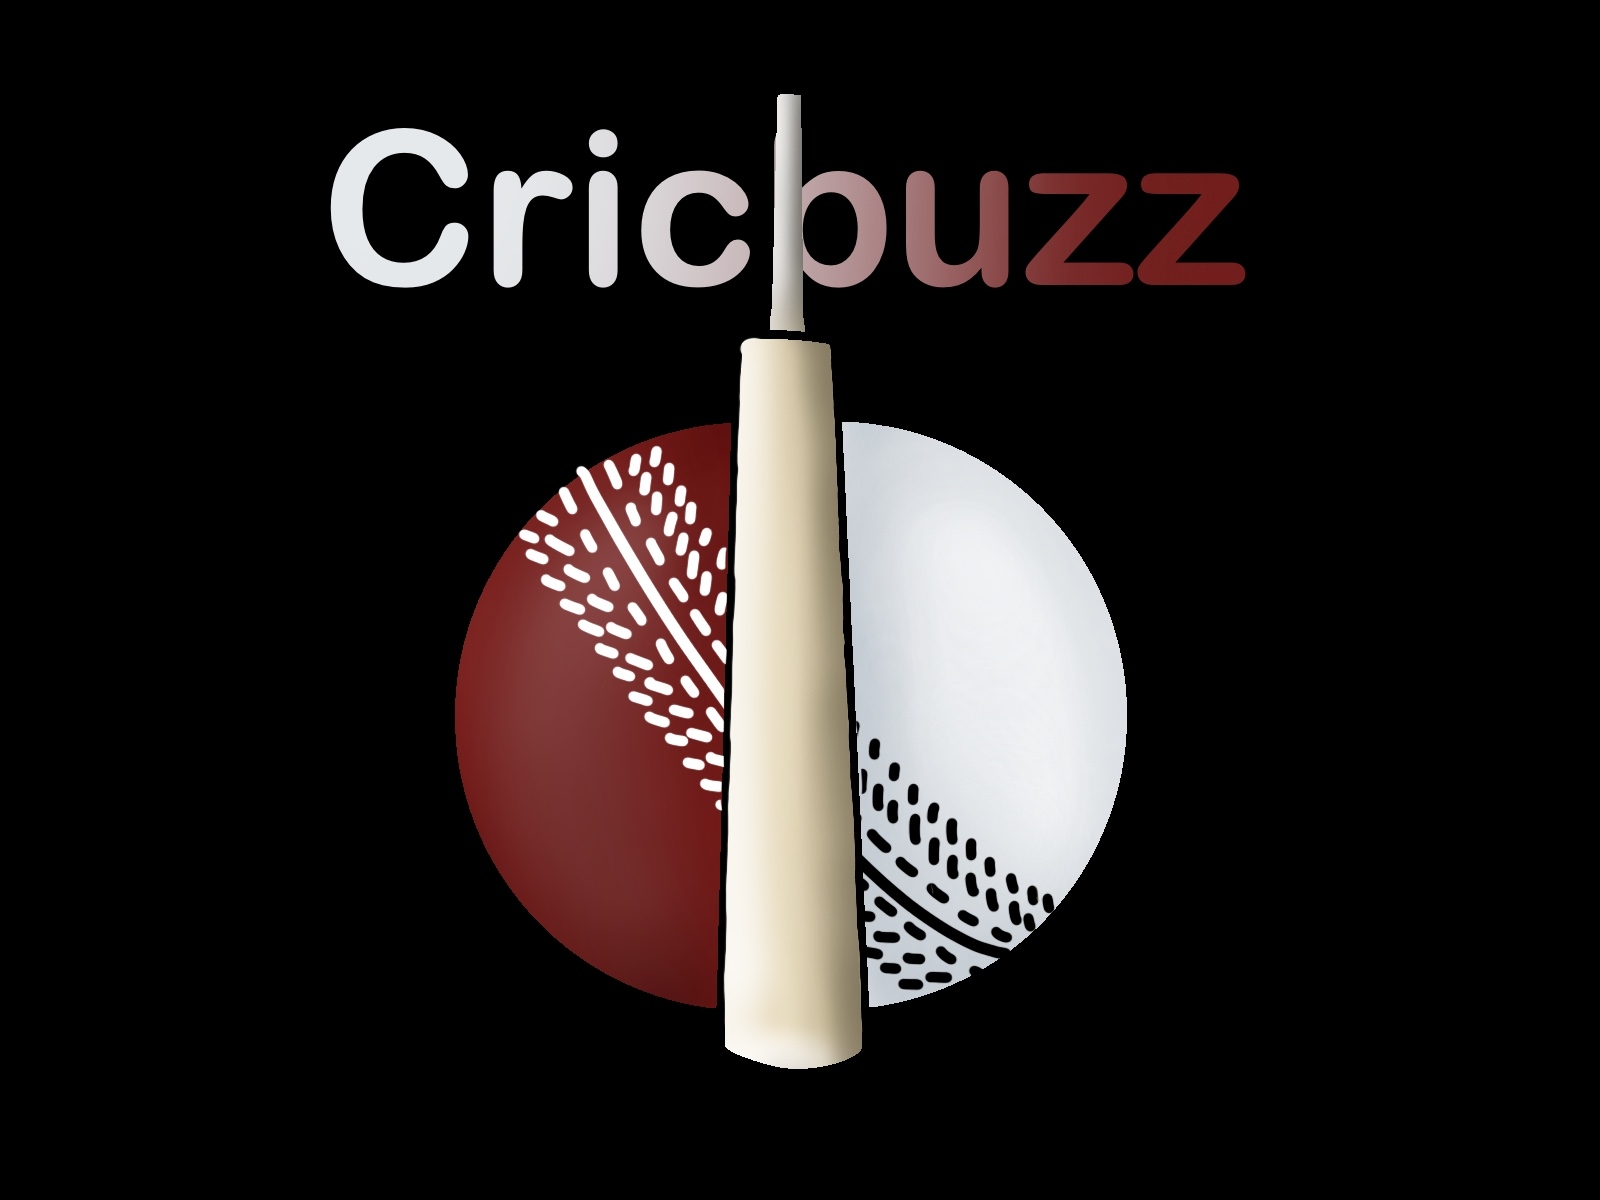 Cricbuzz - In Indian Languages - Apps on Google Play